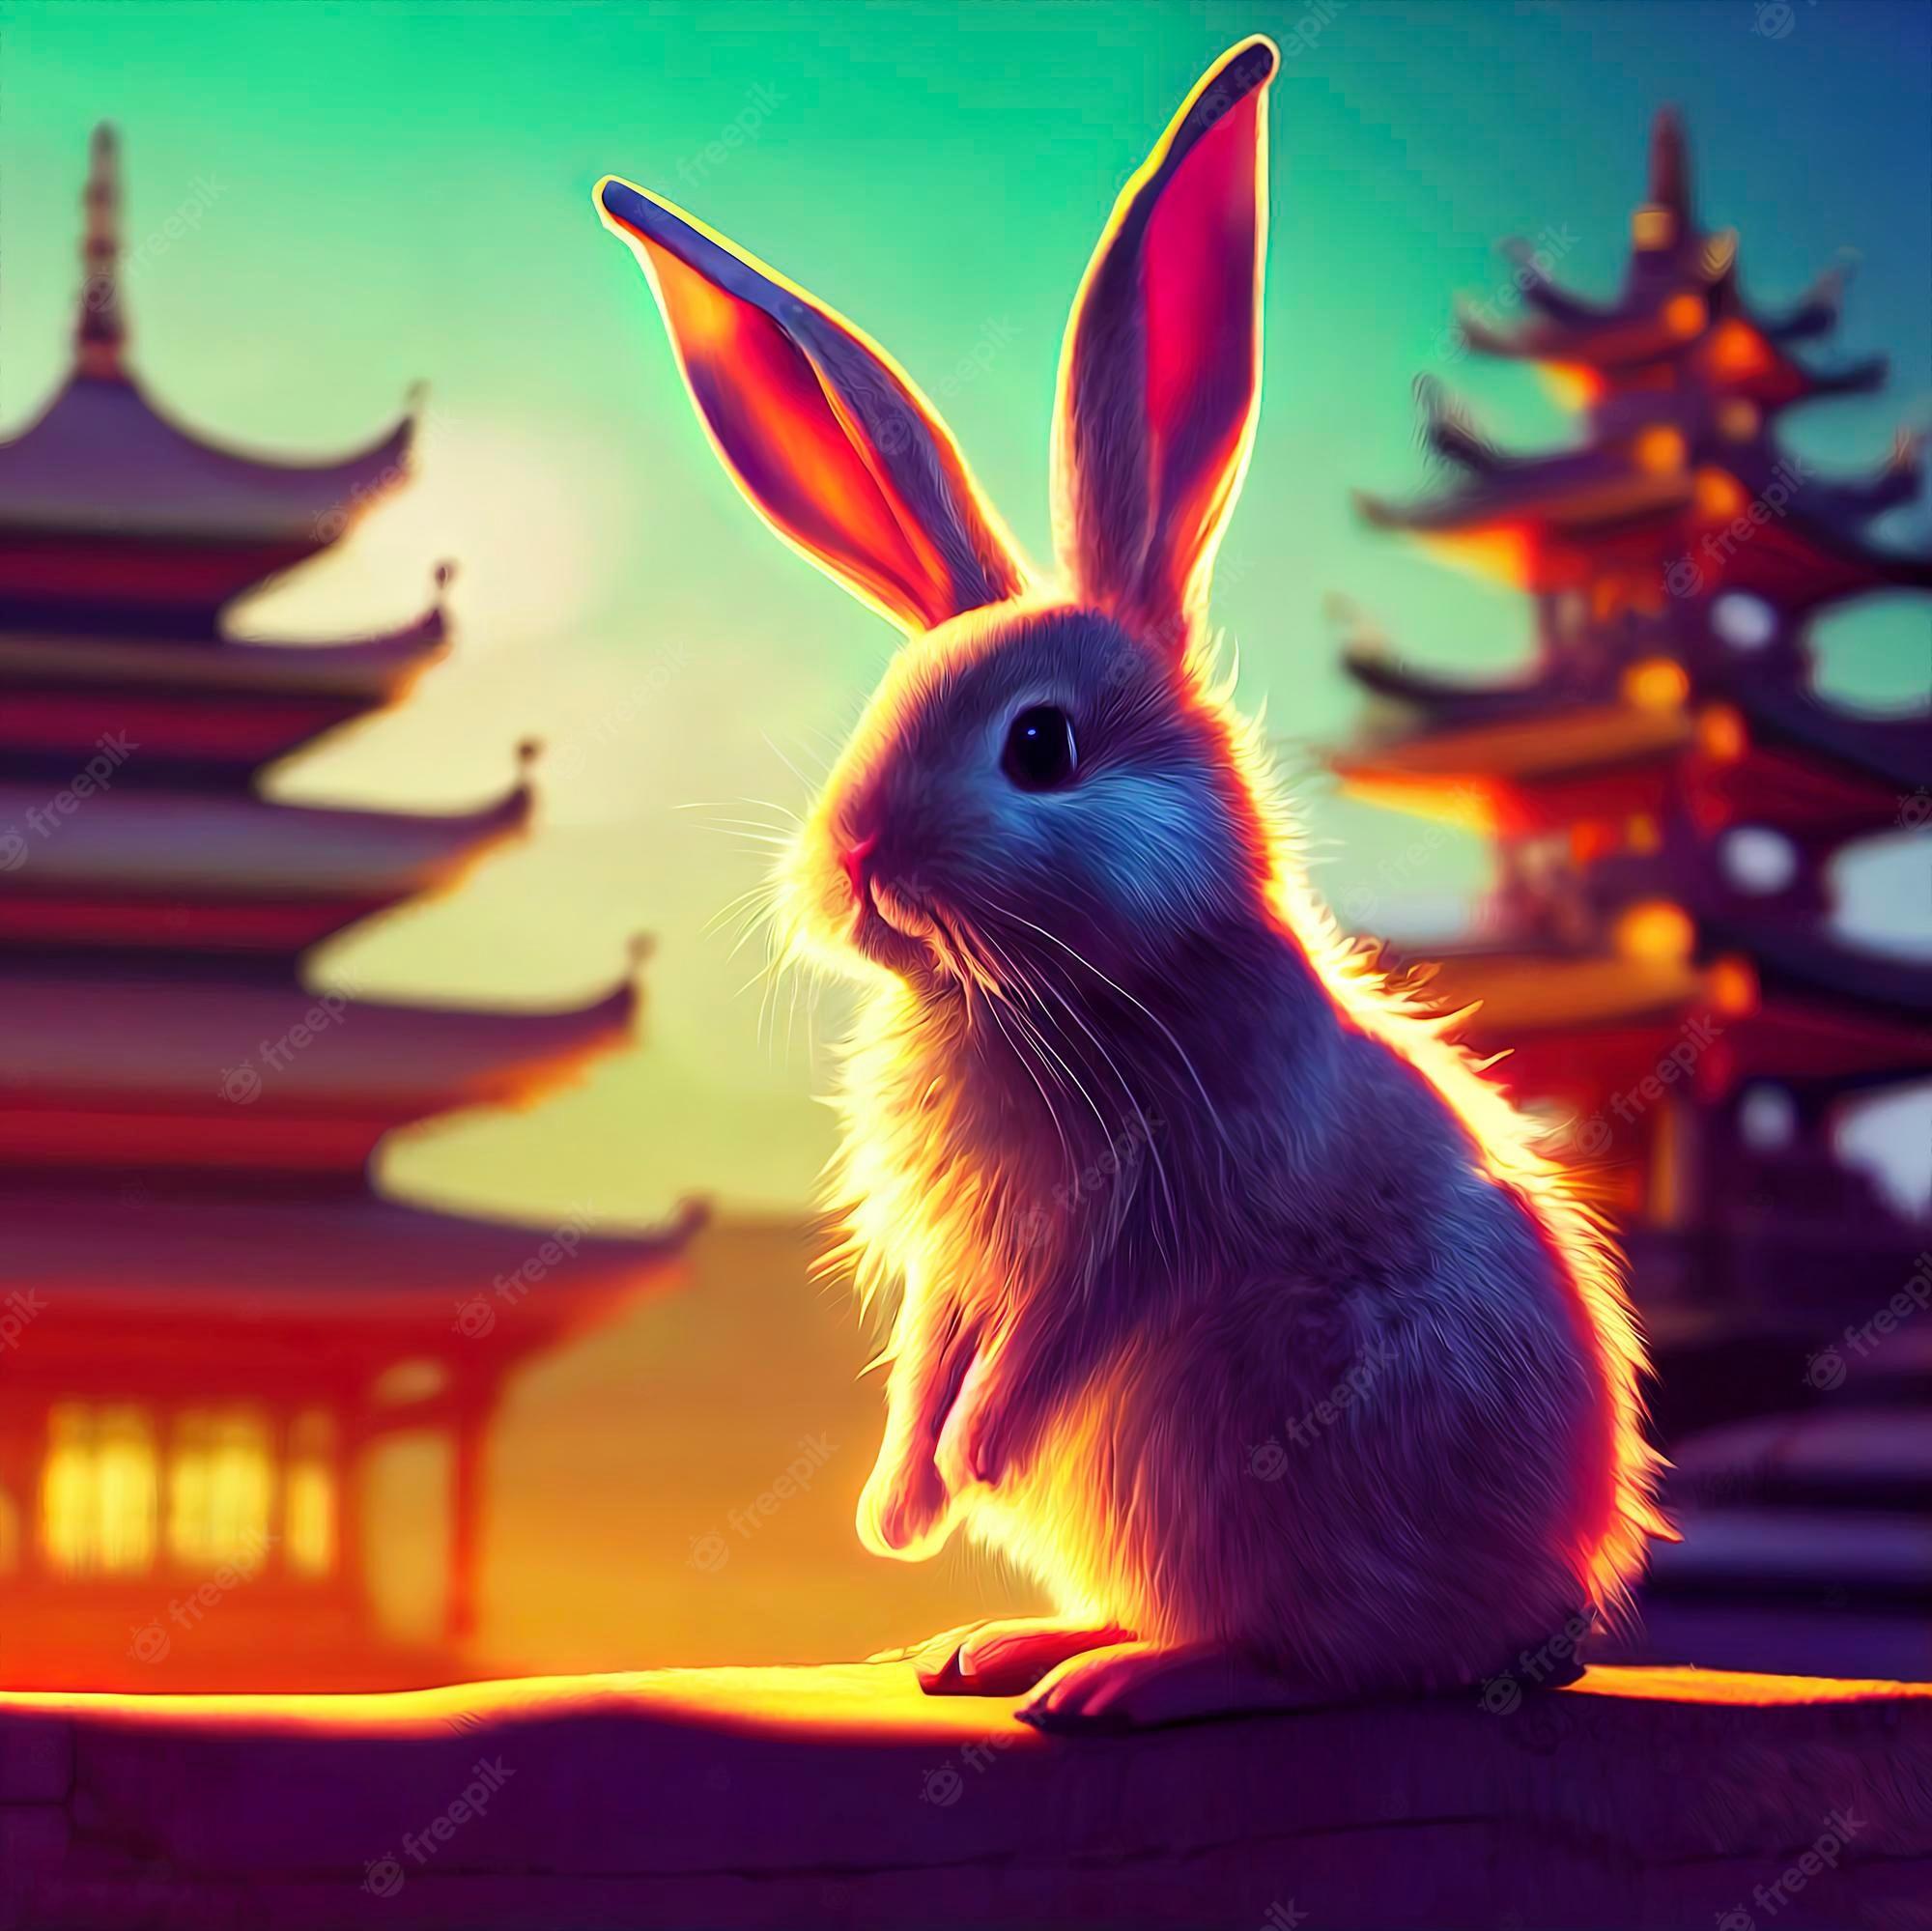 The year of the rabbit